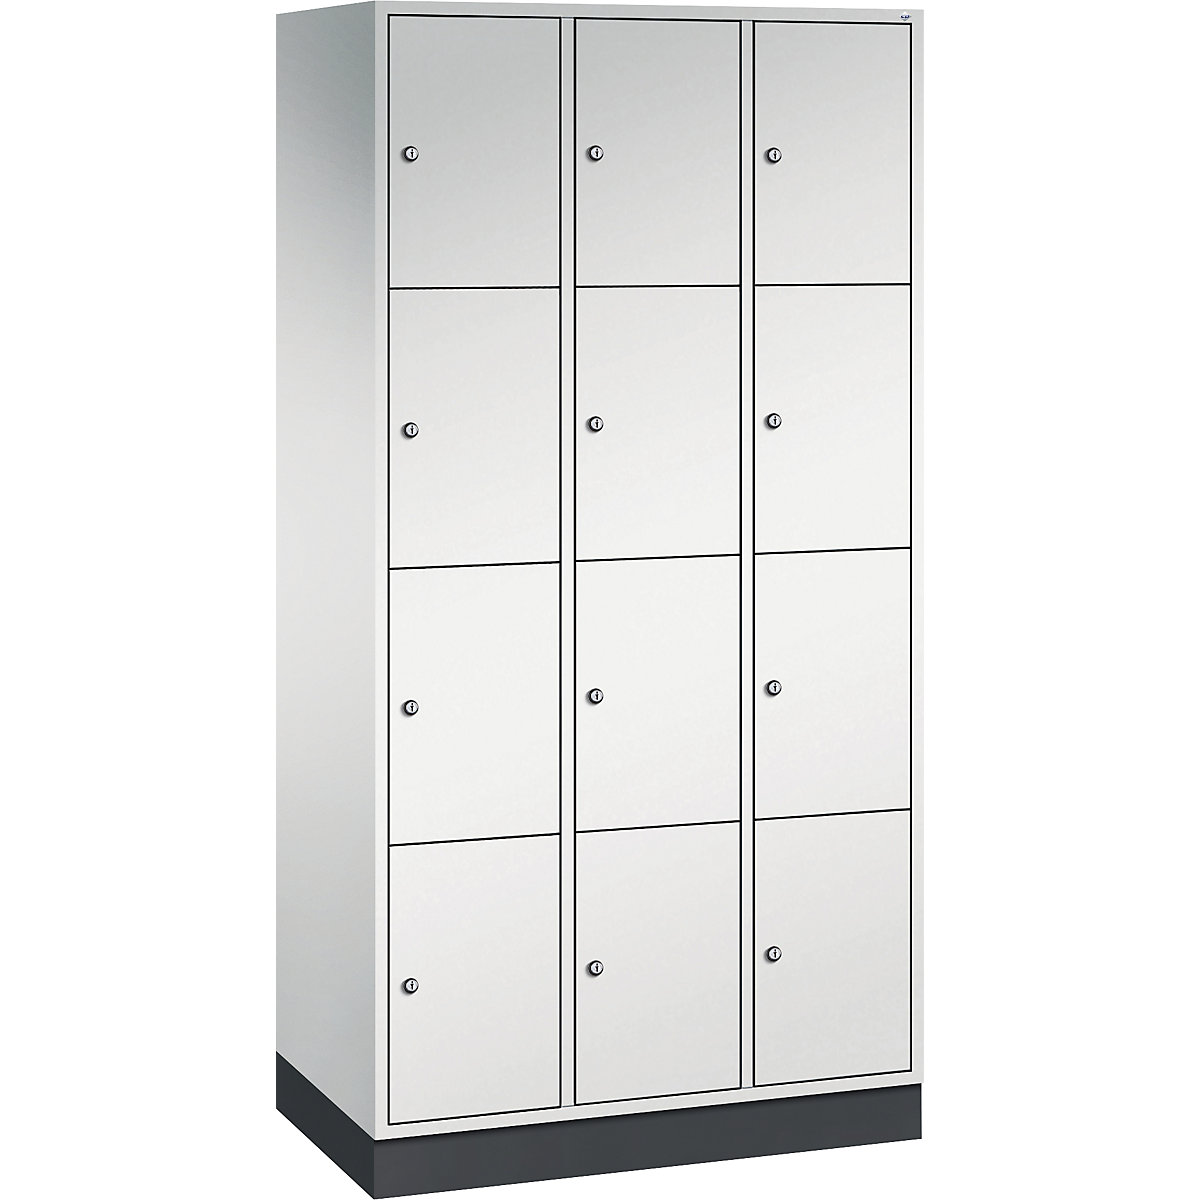 INTRO steel compartment locker, compartment height 435 mm - C+P